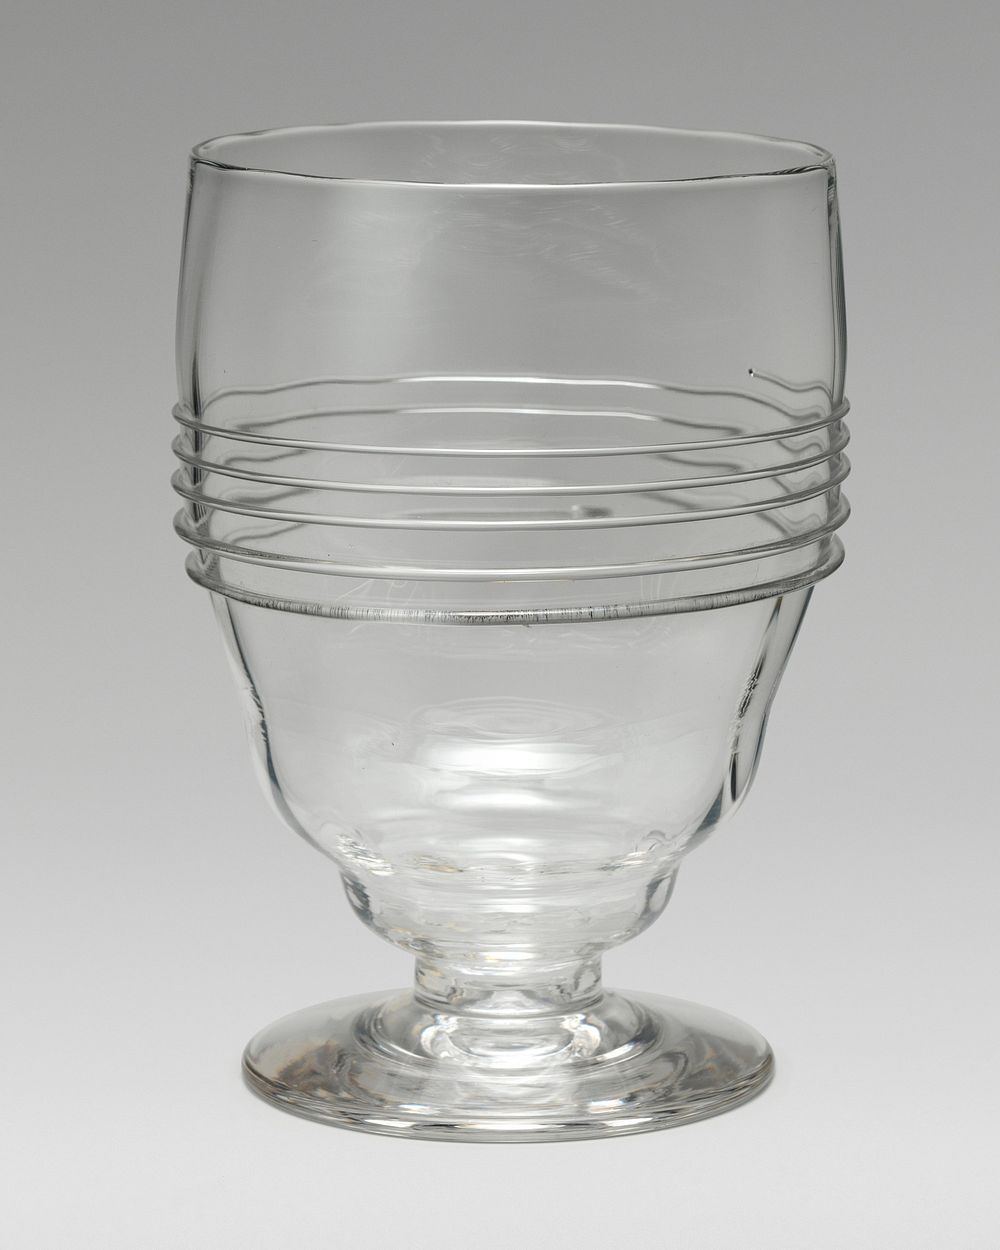 Footed goblet with bulging bowl